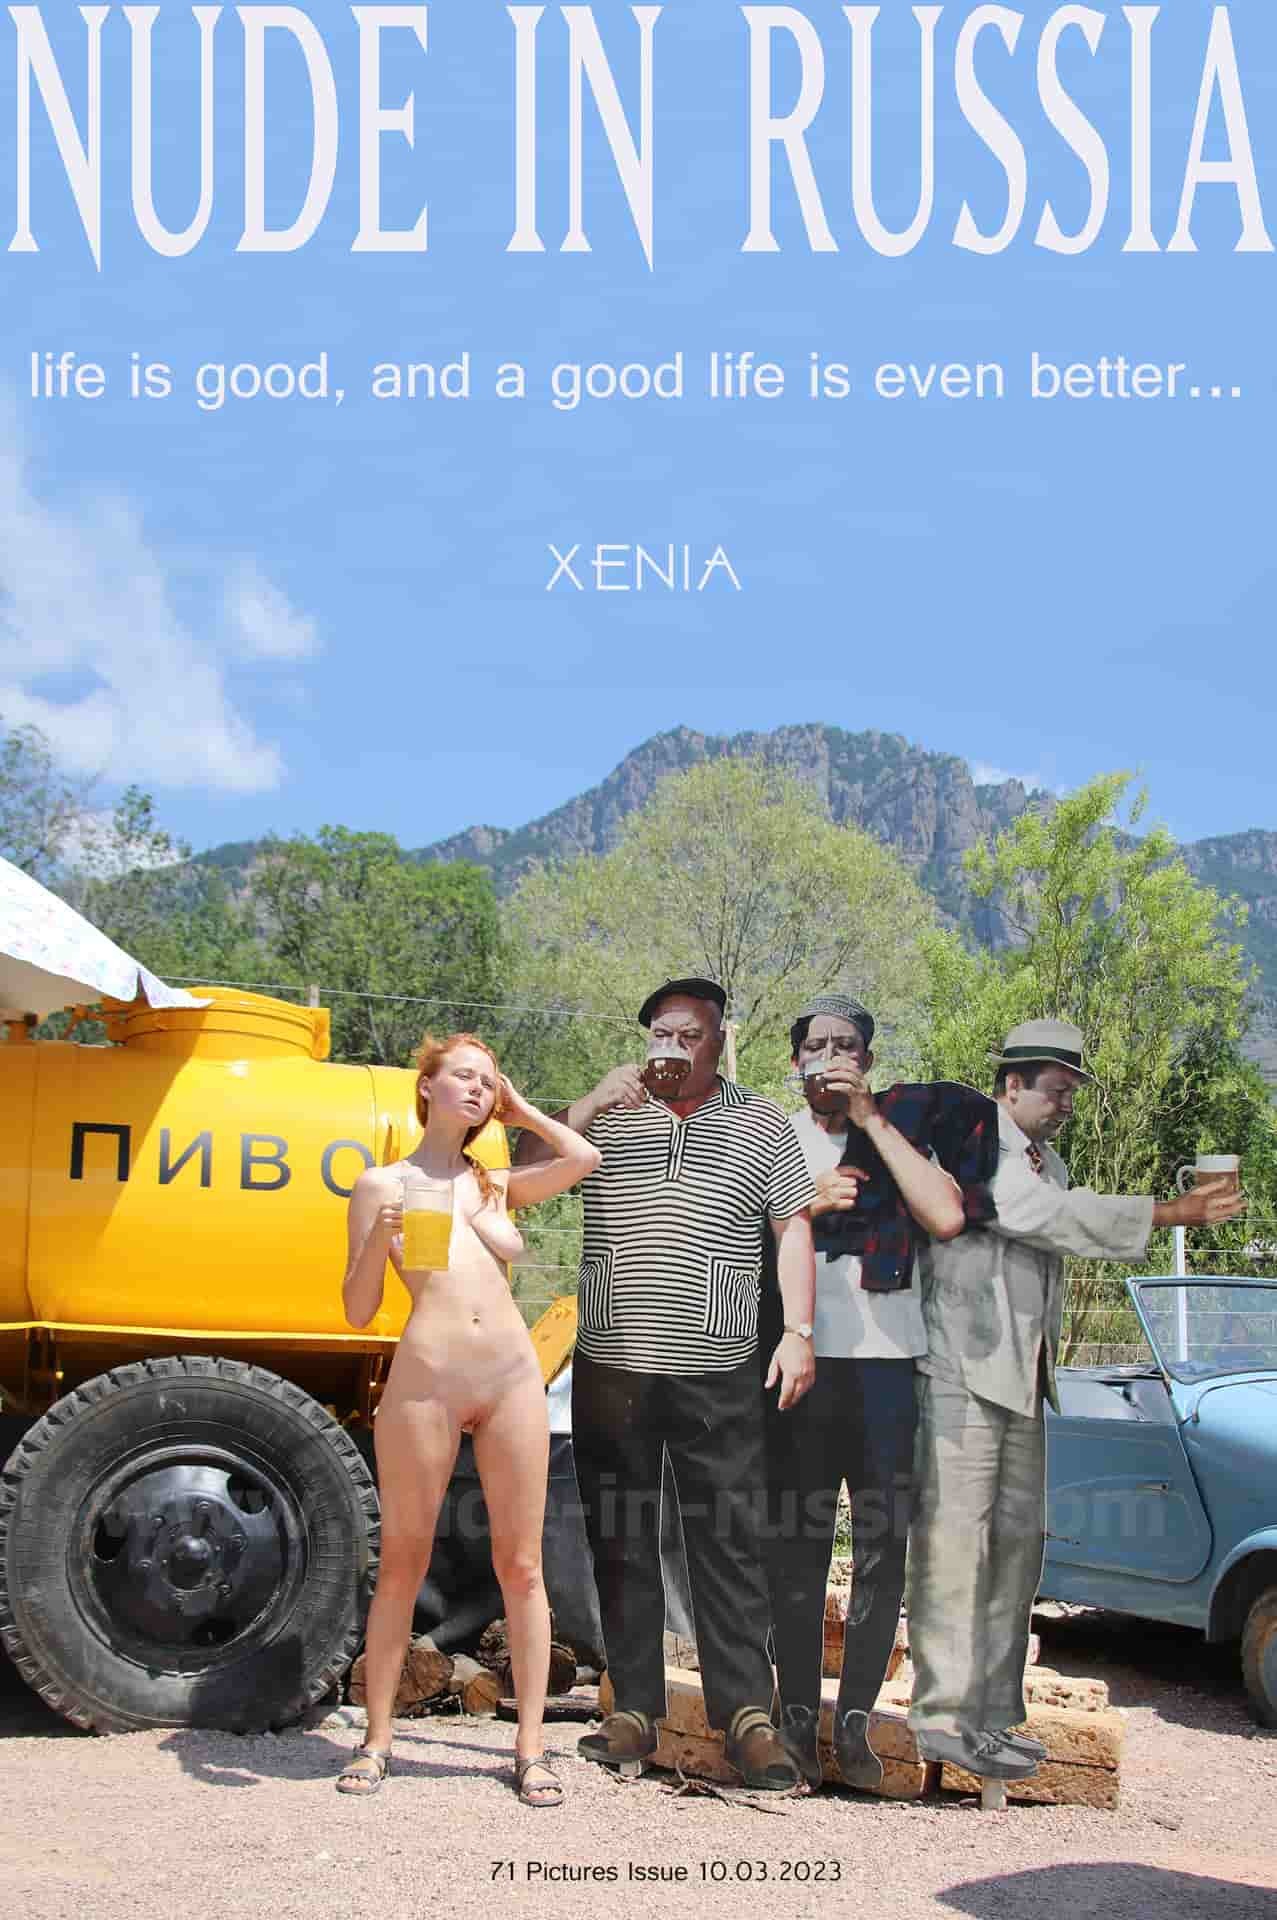 Showing happiness——Xenia - Life is good, and a good life is even better